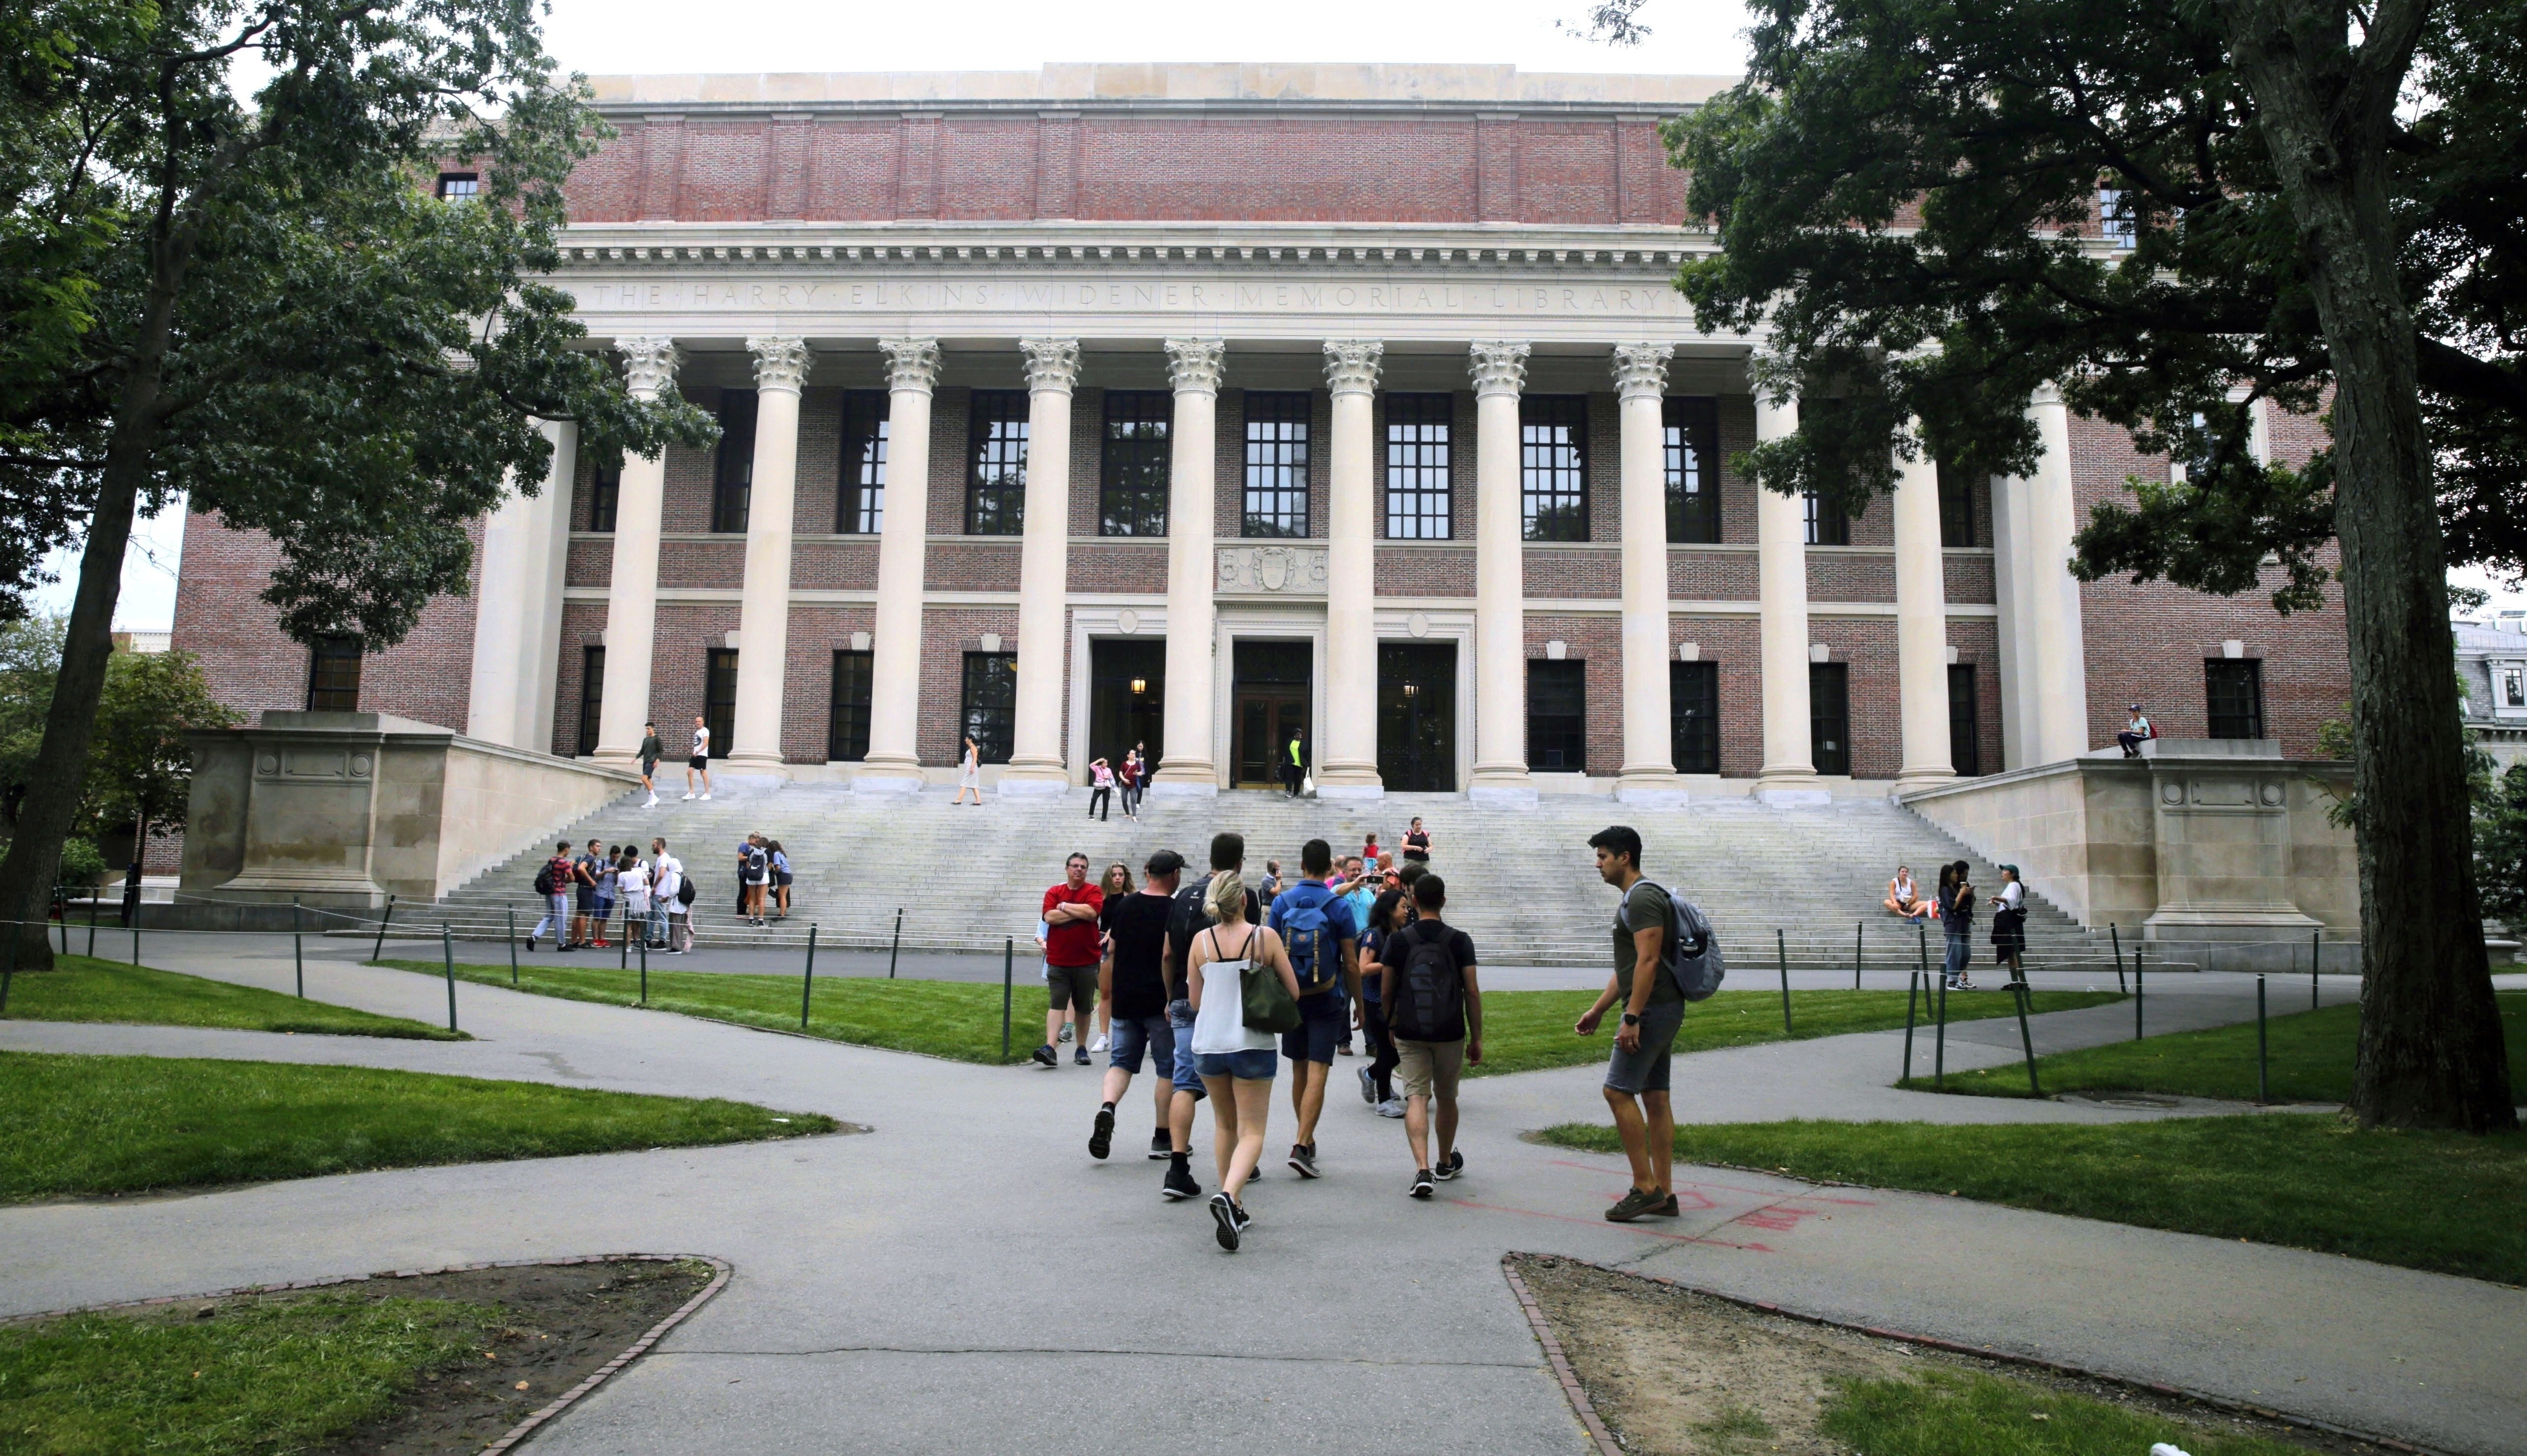 Students walk near the Widener Library at Harvard University in Cambridge, Massachusetts on August 13, 2019. A federal appeals court has upheld a district court decision clearing Harvard University of intentional discrimination against Asian-American applicants. Photo: AP